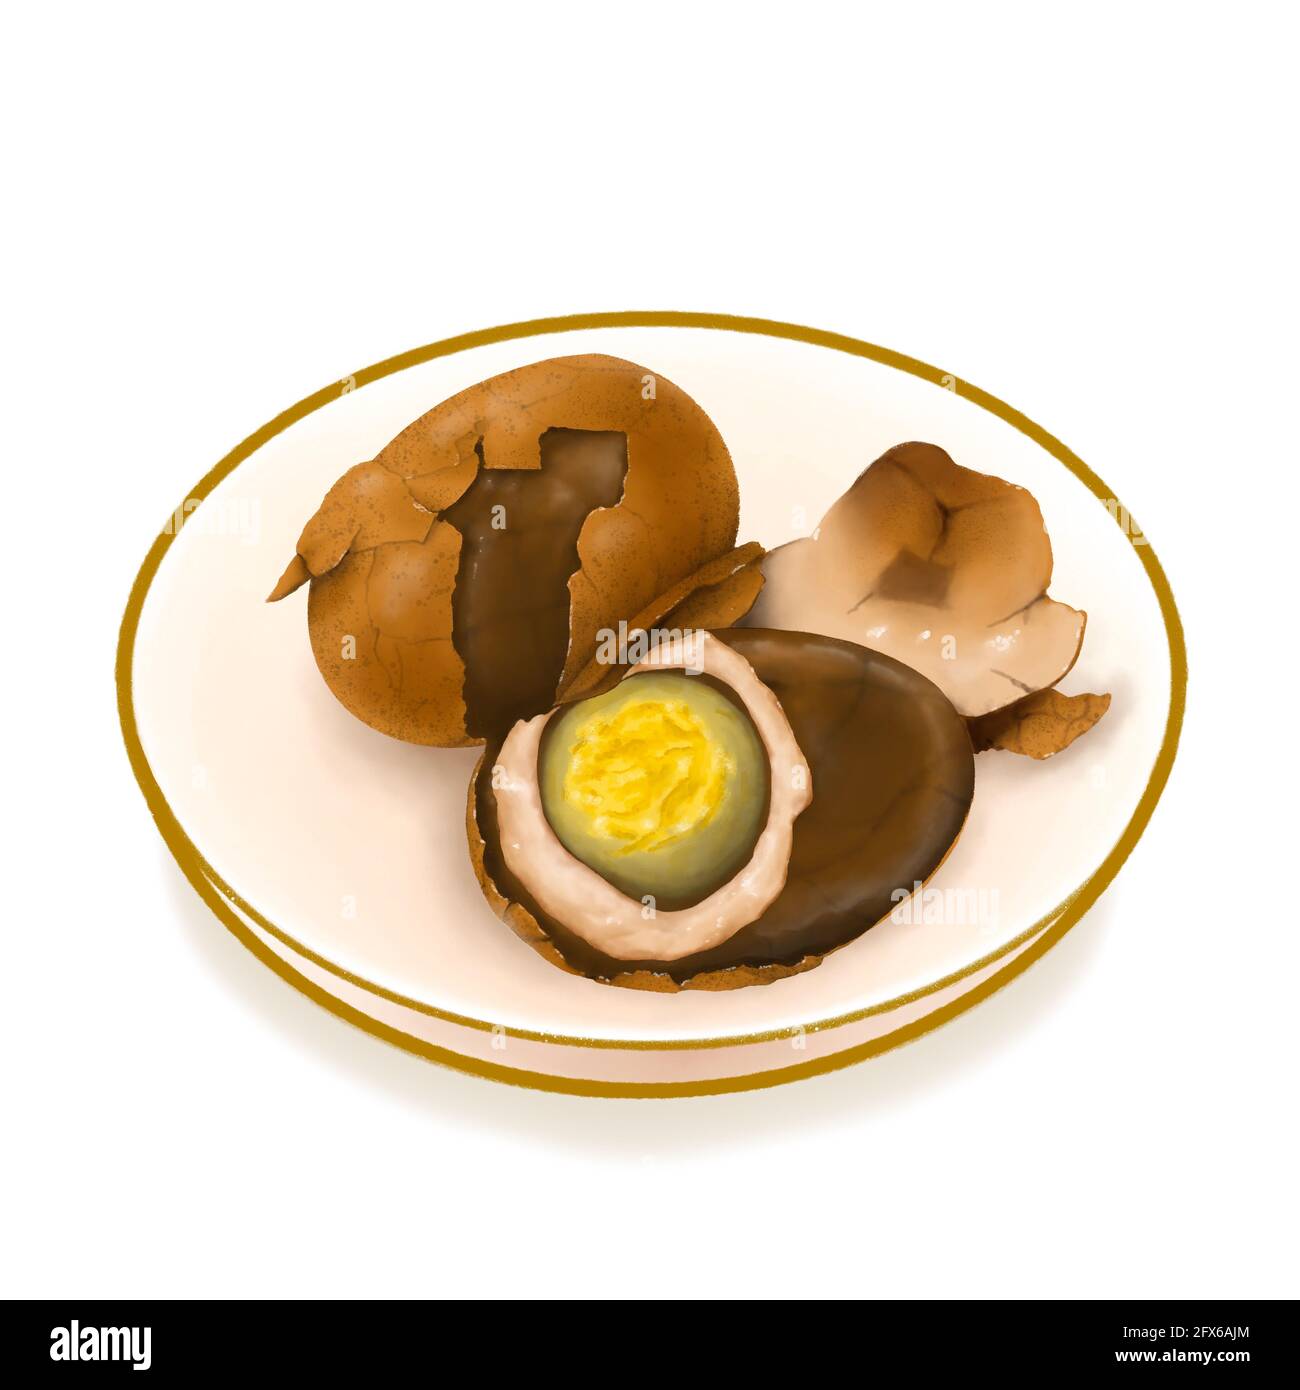 Taiwan tea egg, a digital painting of Taiwanese traditional boiled eggs with black tea raster 3D illustration isolated on white background. Stock Photo